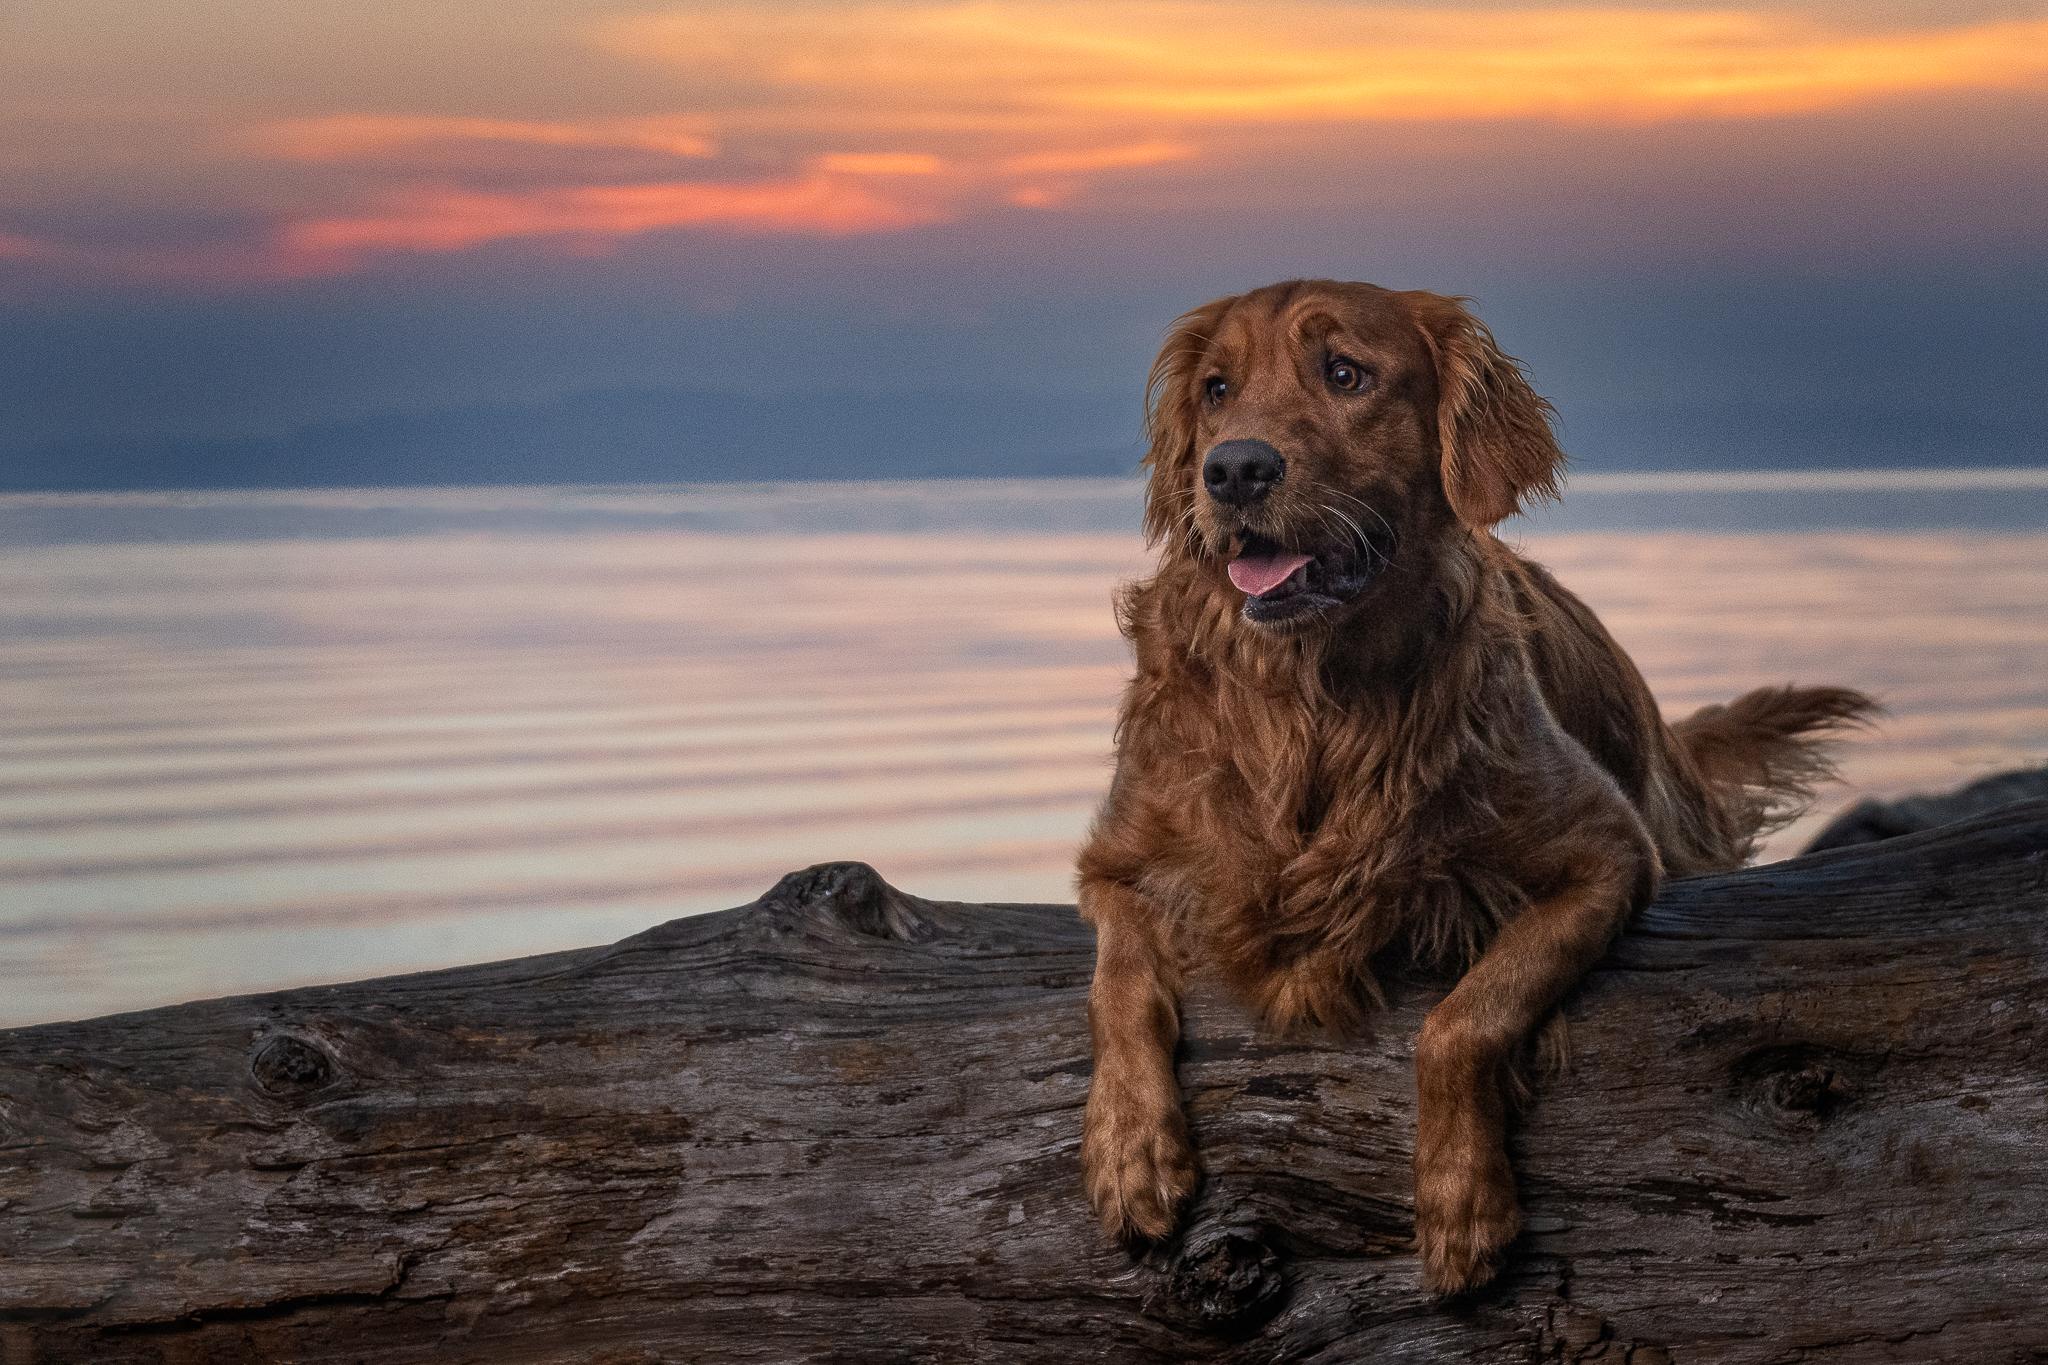 Golden Retriever resting on a log by the water